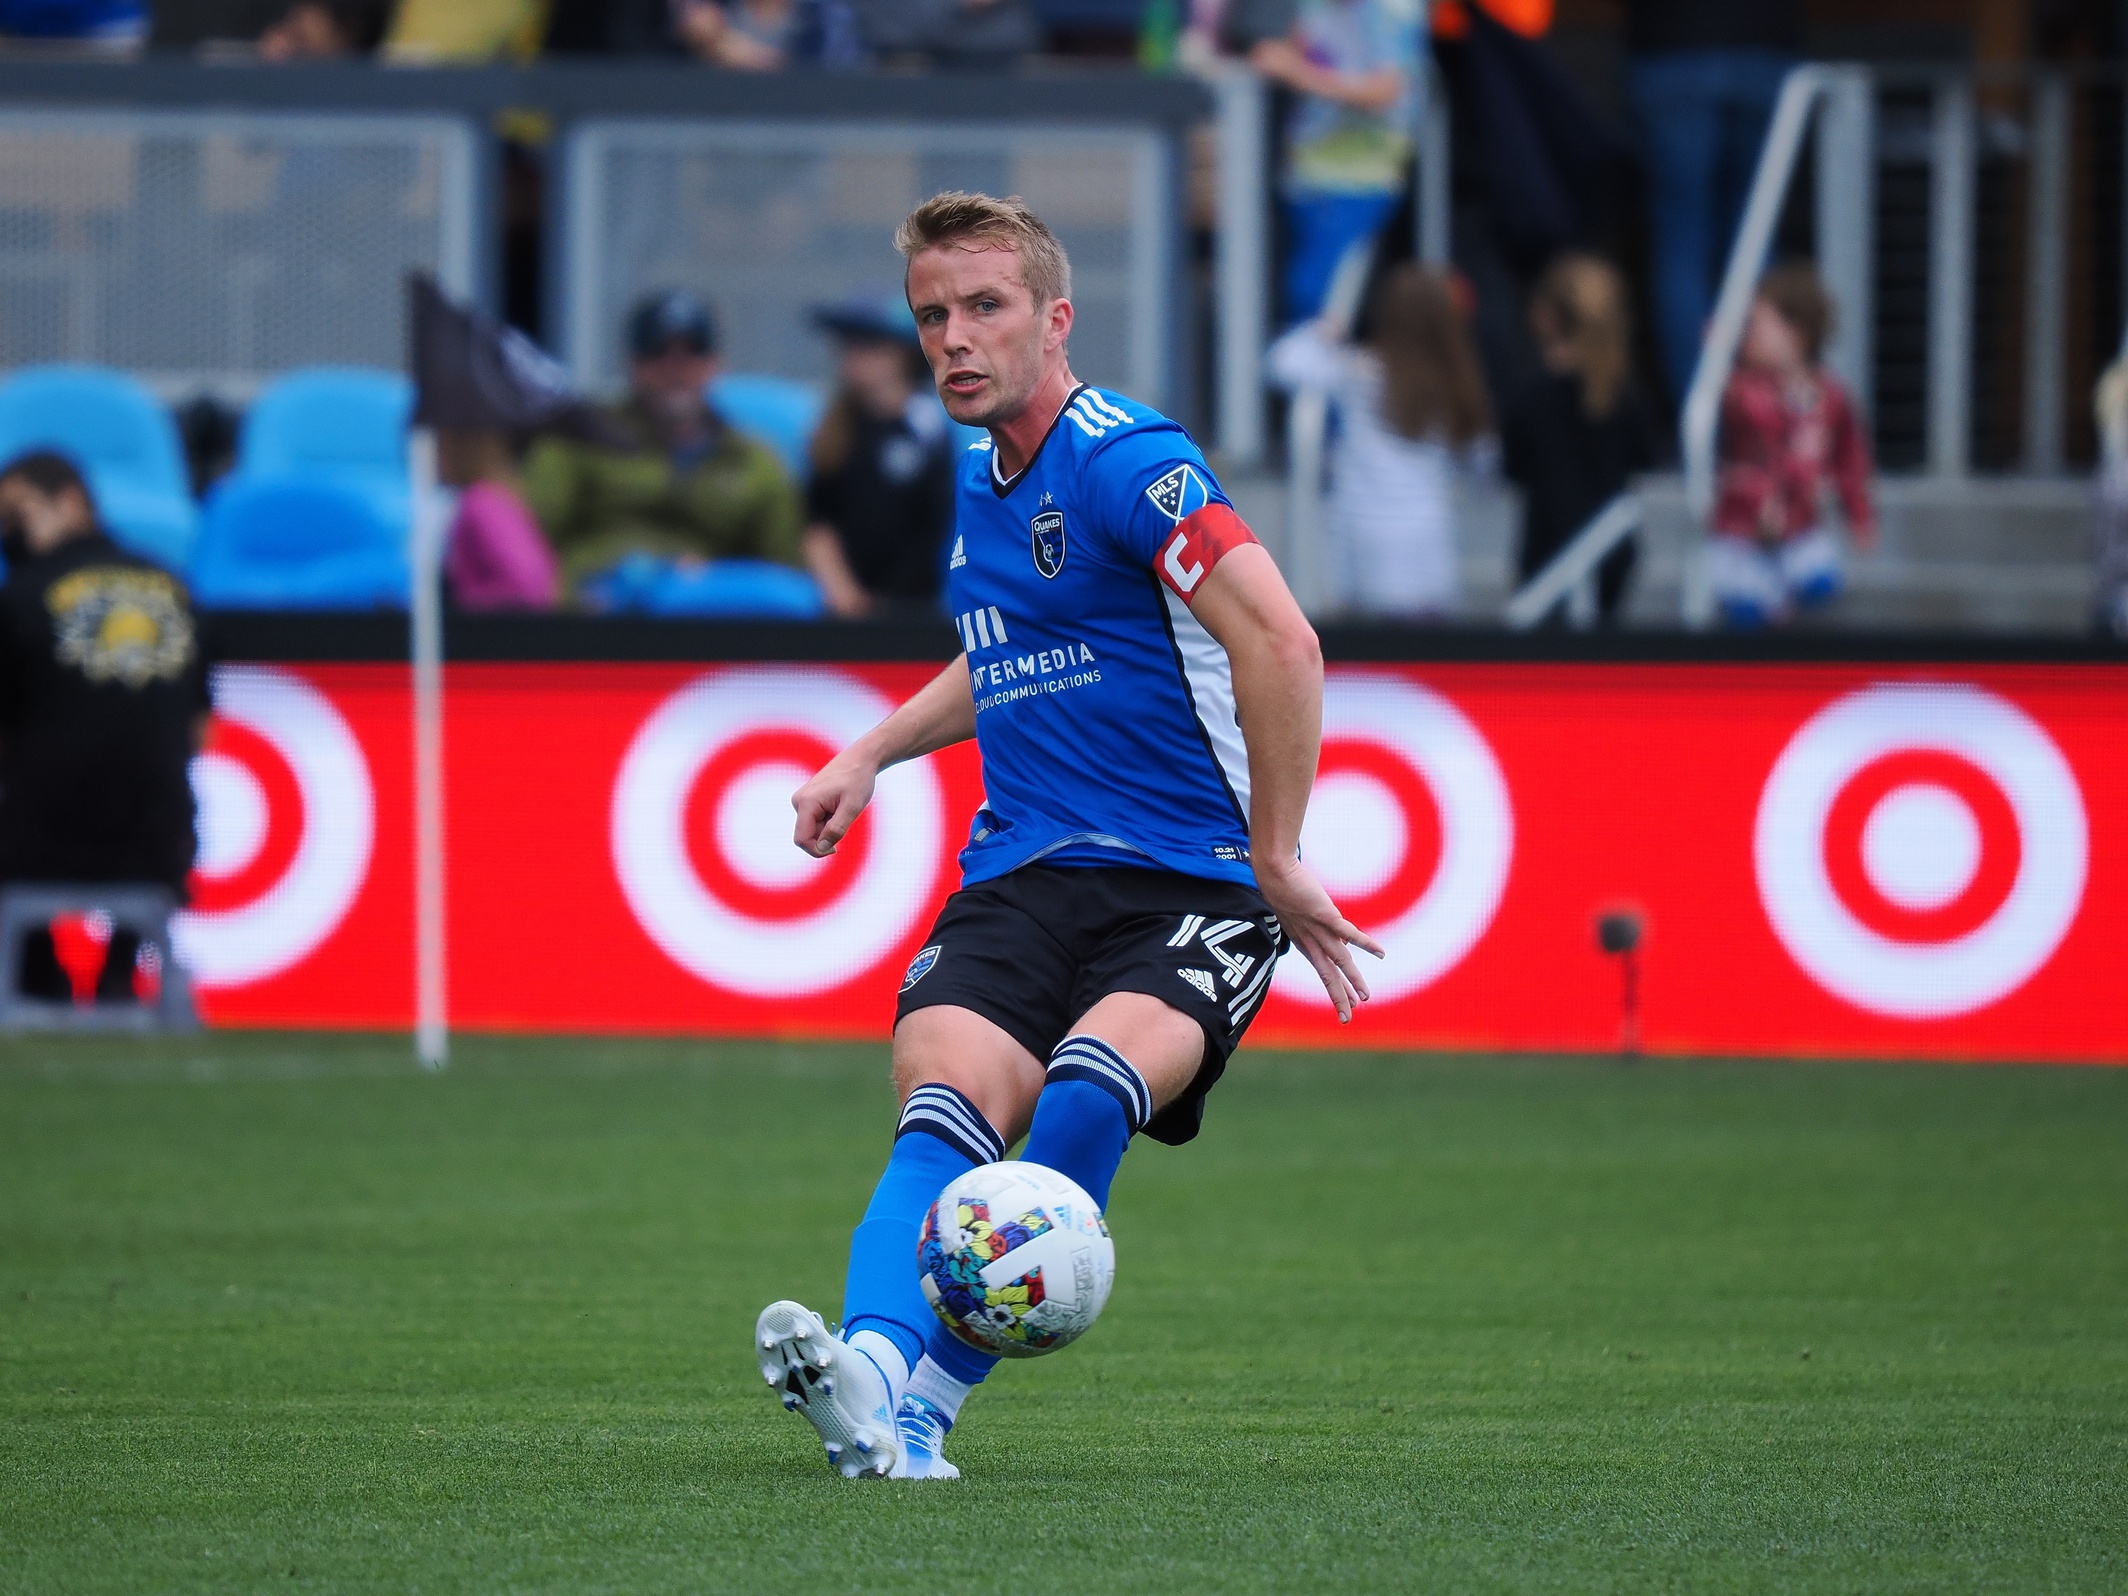 San Jose Earthquakes vs Chicago Fire Prediction, 7/3/2022 MLS Soccer Pick, Tips and Odds